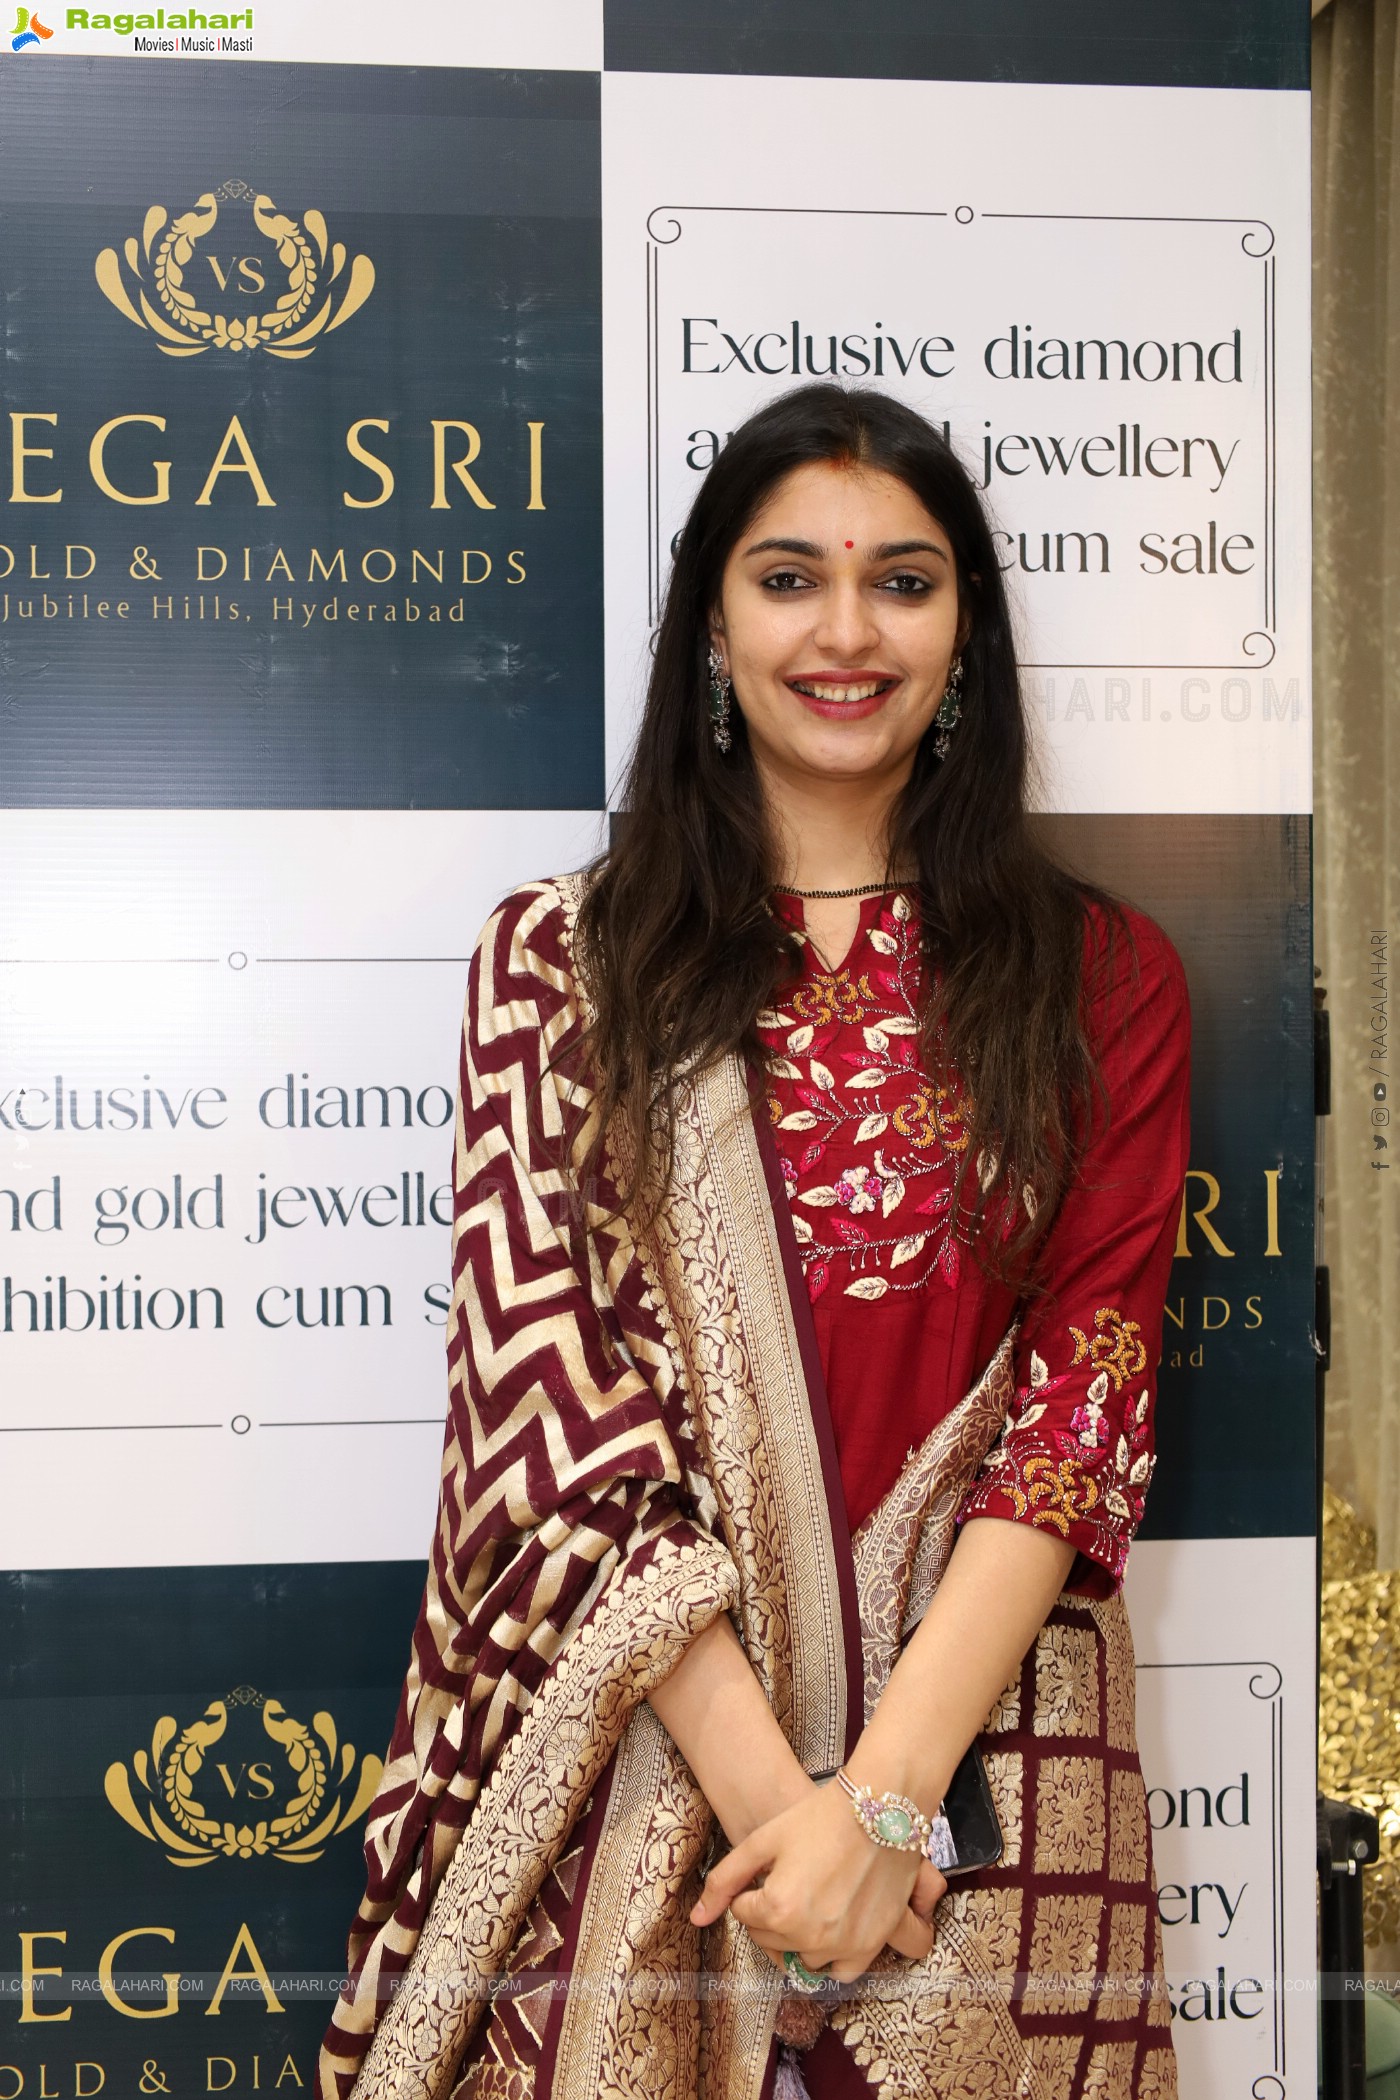 Vega Sri Gold and Diamonds Offers Exclusive Limited-Time Deal this Women's Day season!!!